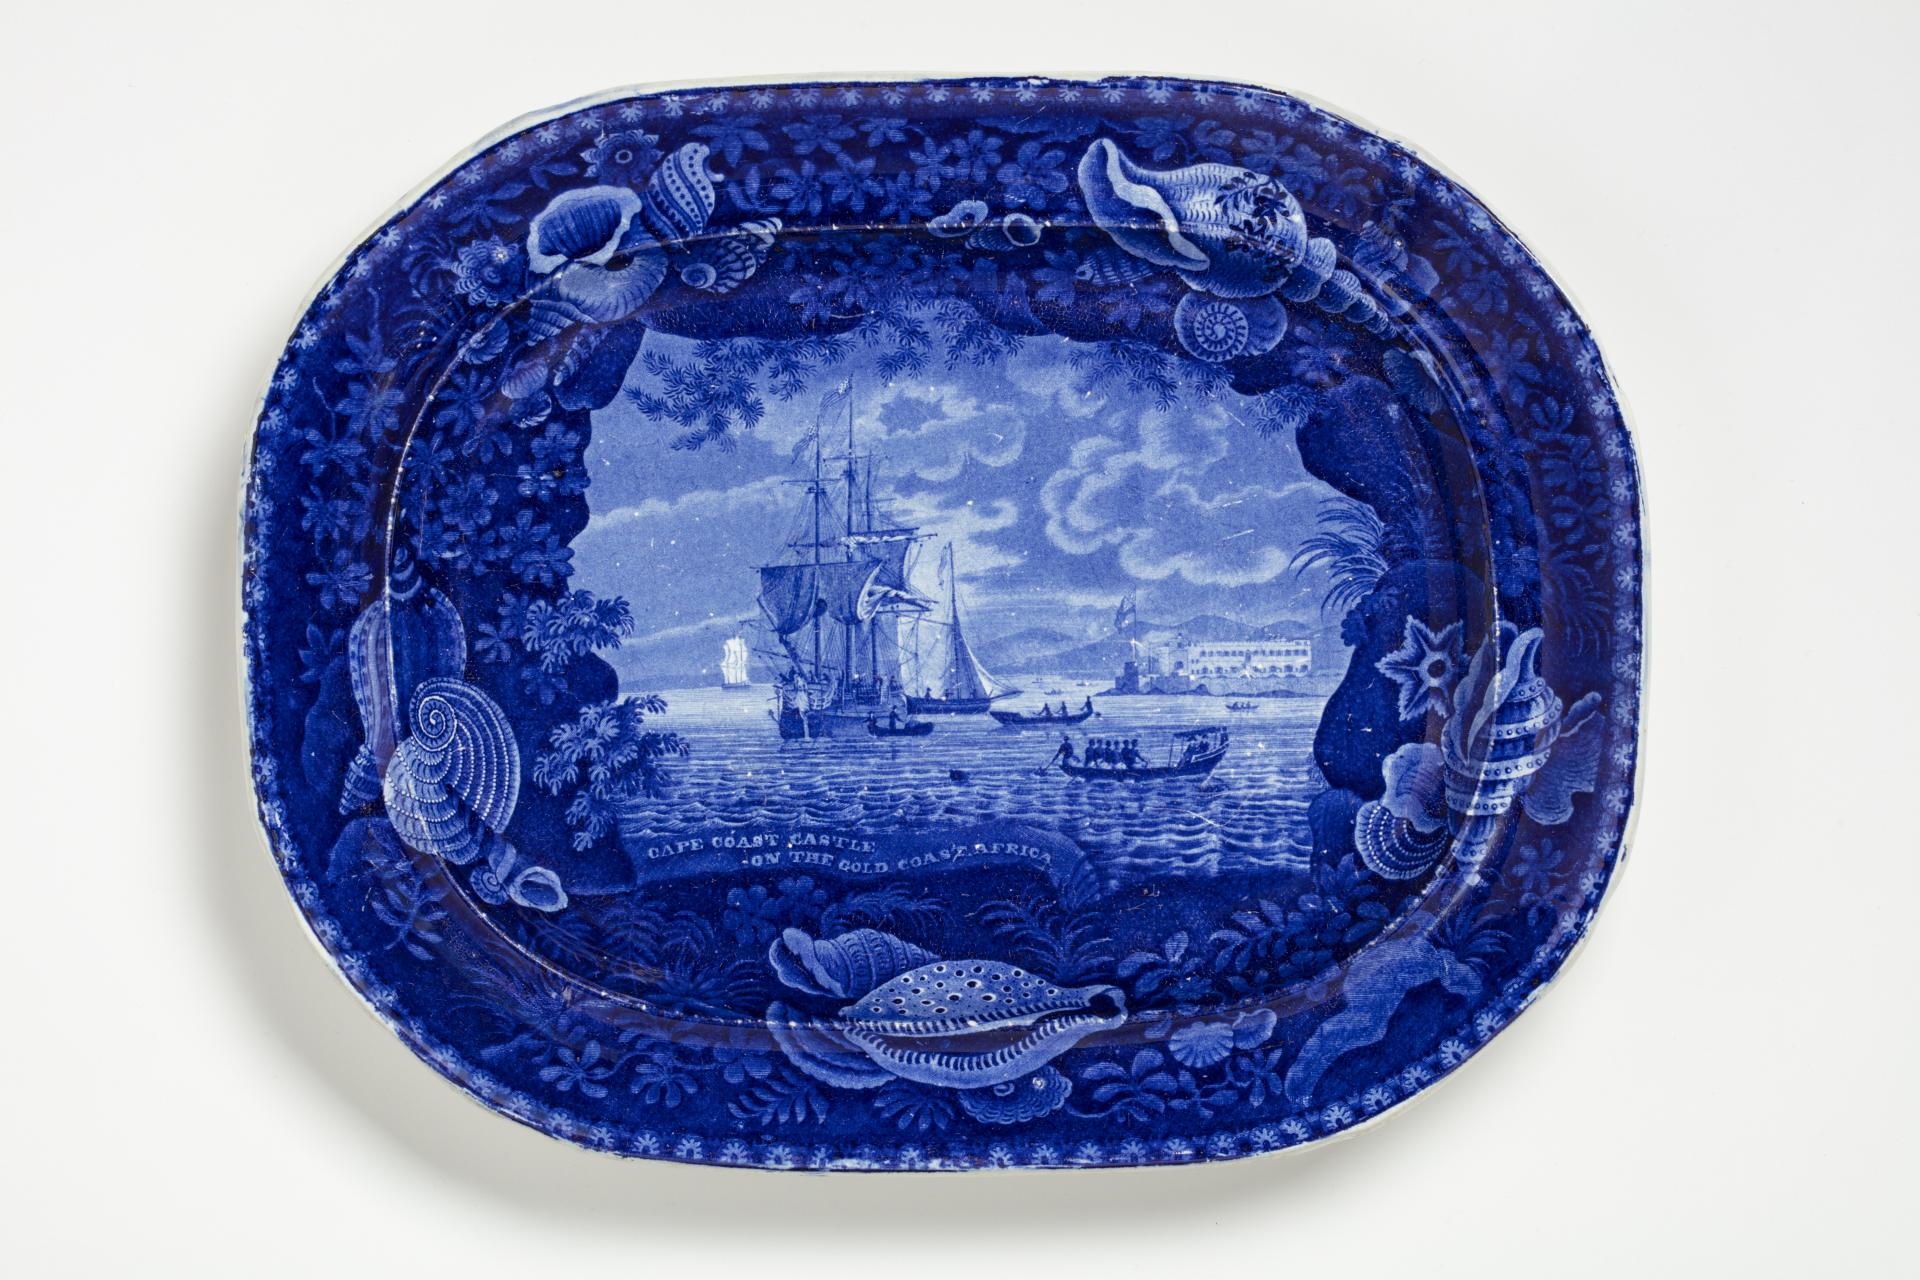 blue and white transferware platter depicting a slave ship off near the Cape Coast Castle, with a decorative shell border